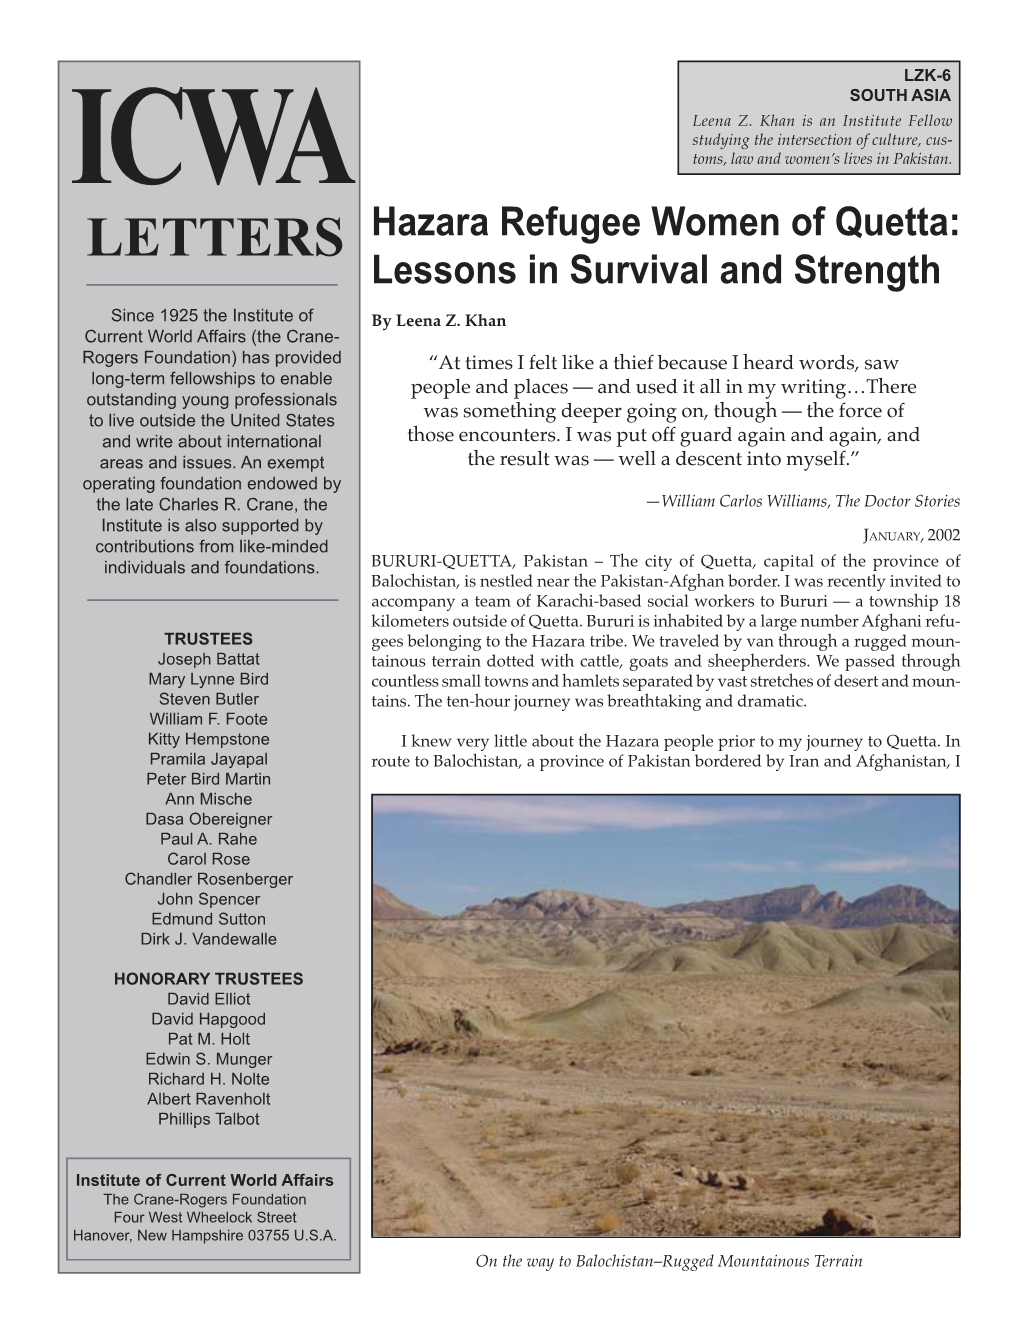 Hazara Refugee Women of Quetta: Lessons in Survival and Strength